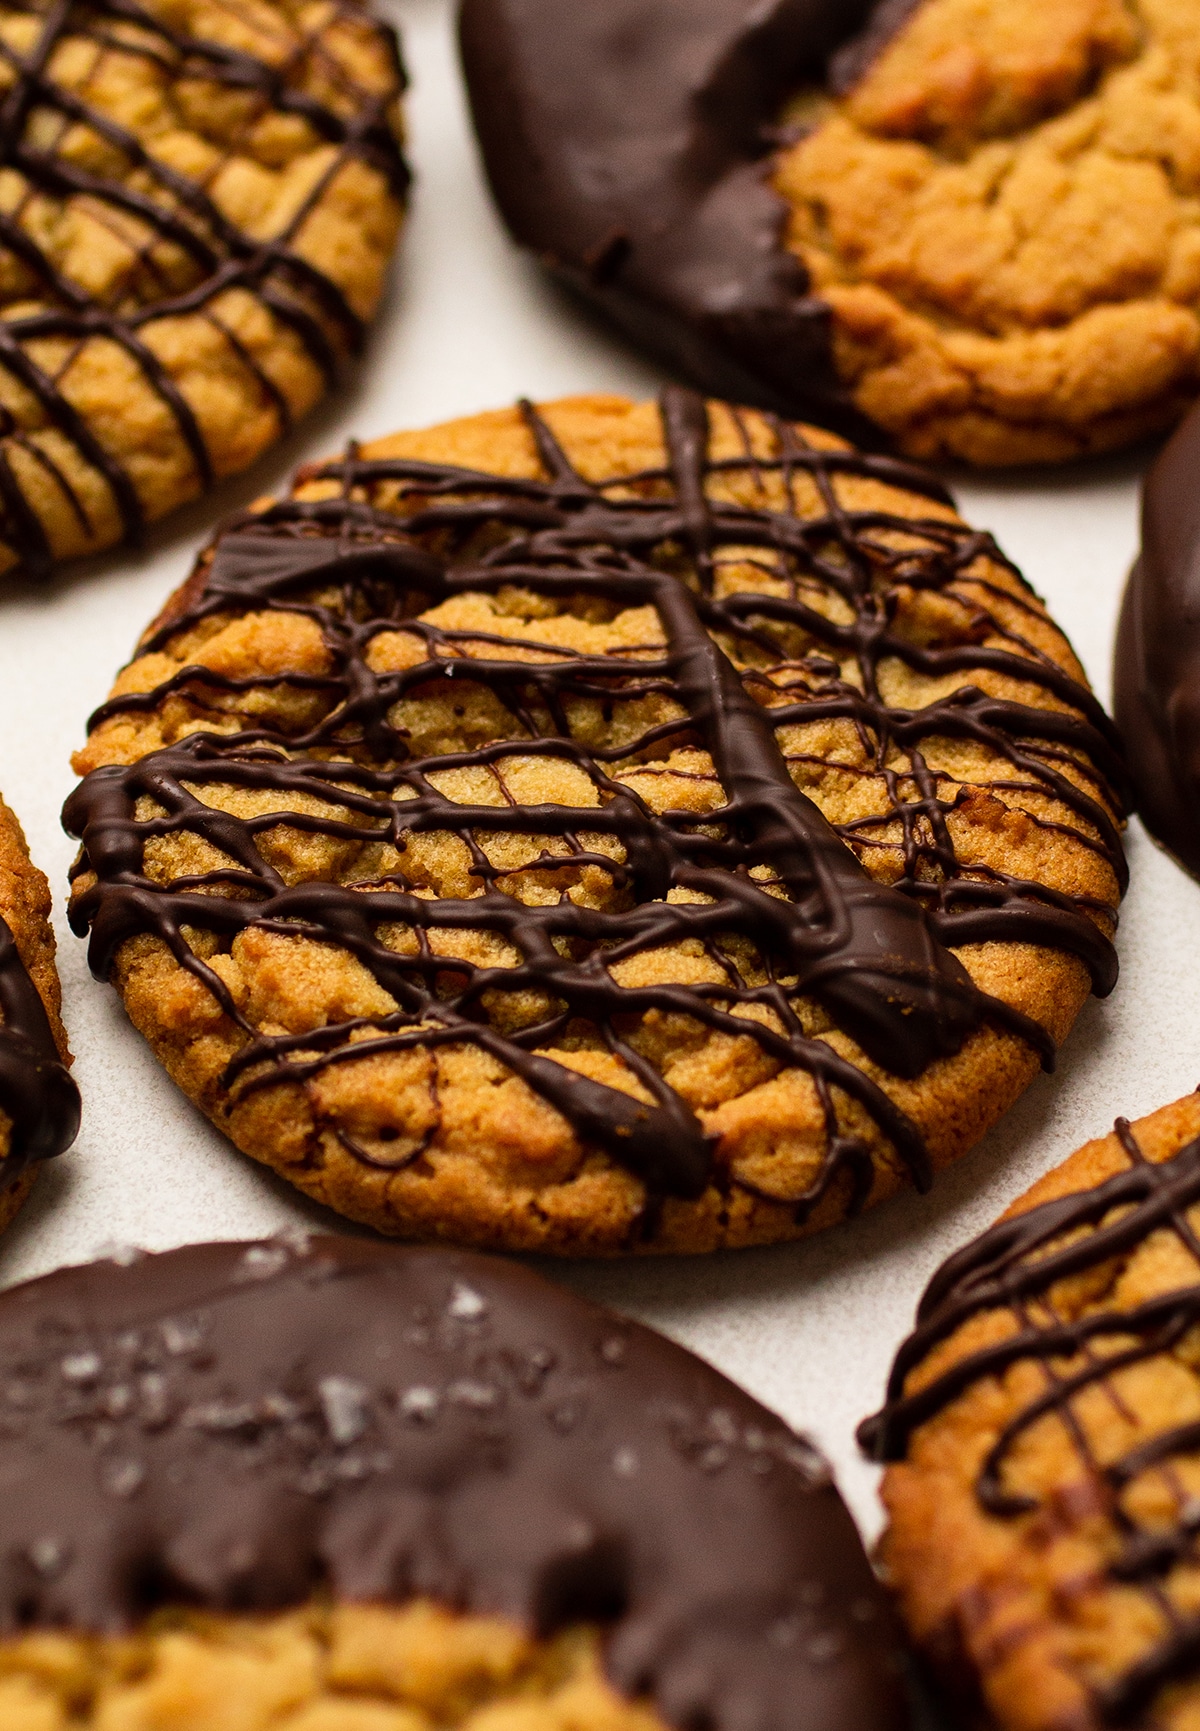 Peanut butter cookies with chocolate decorations, sitting on a white plate.